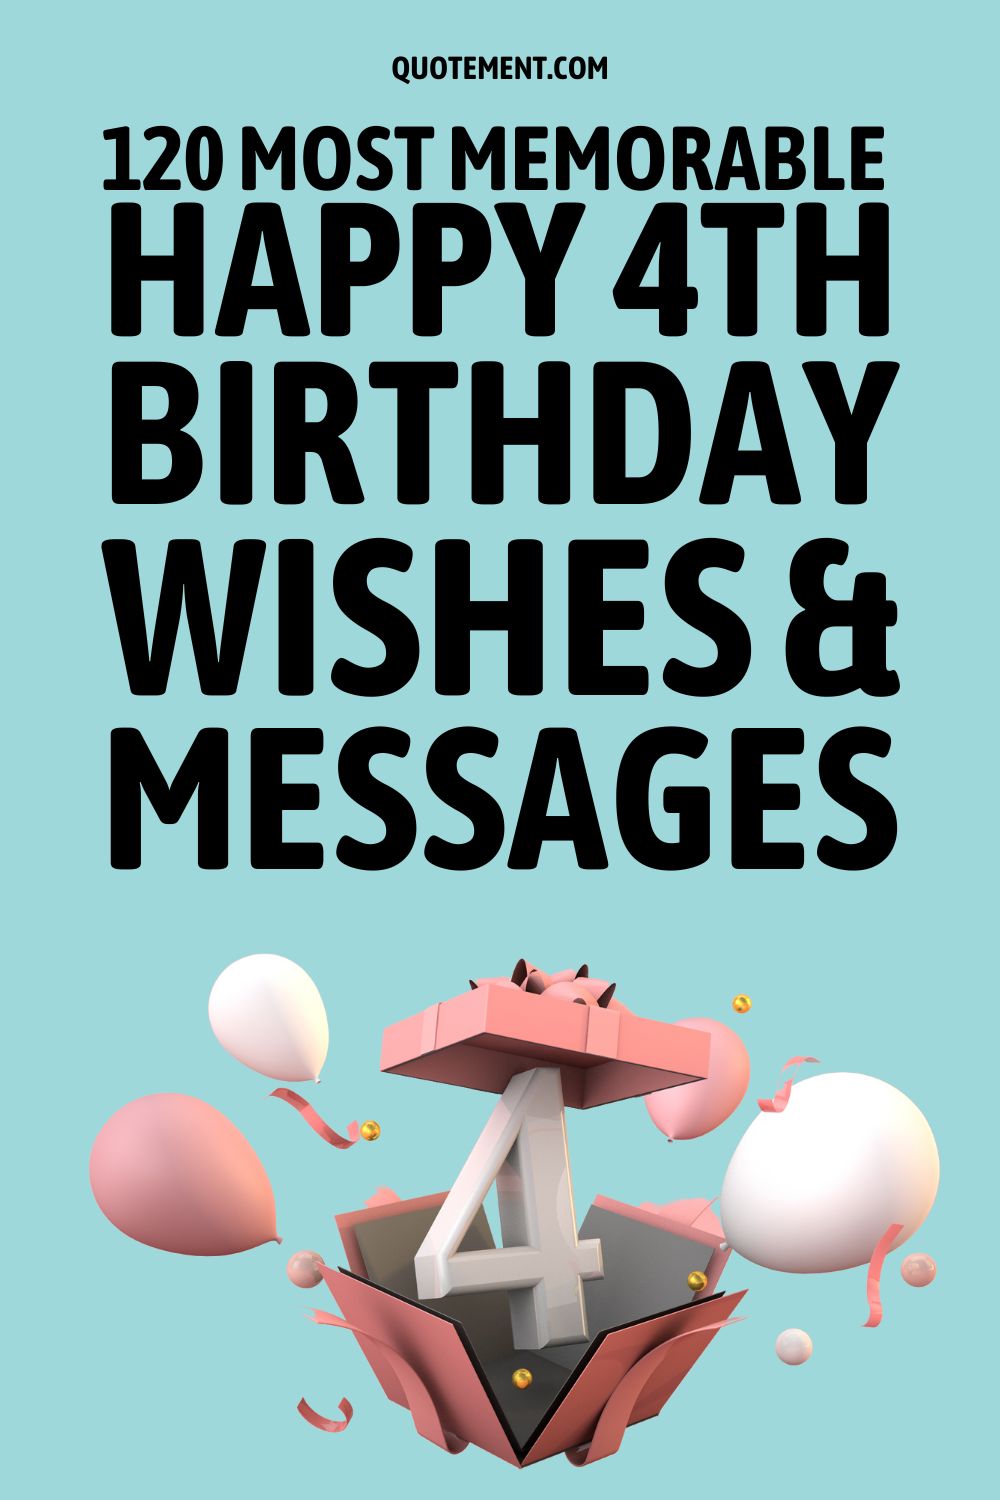 120 Most Memorable Happy 4th Birthday Wishes & Messages